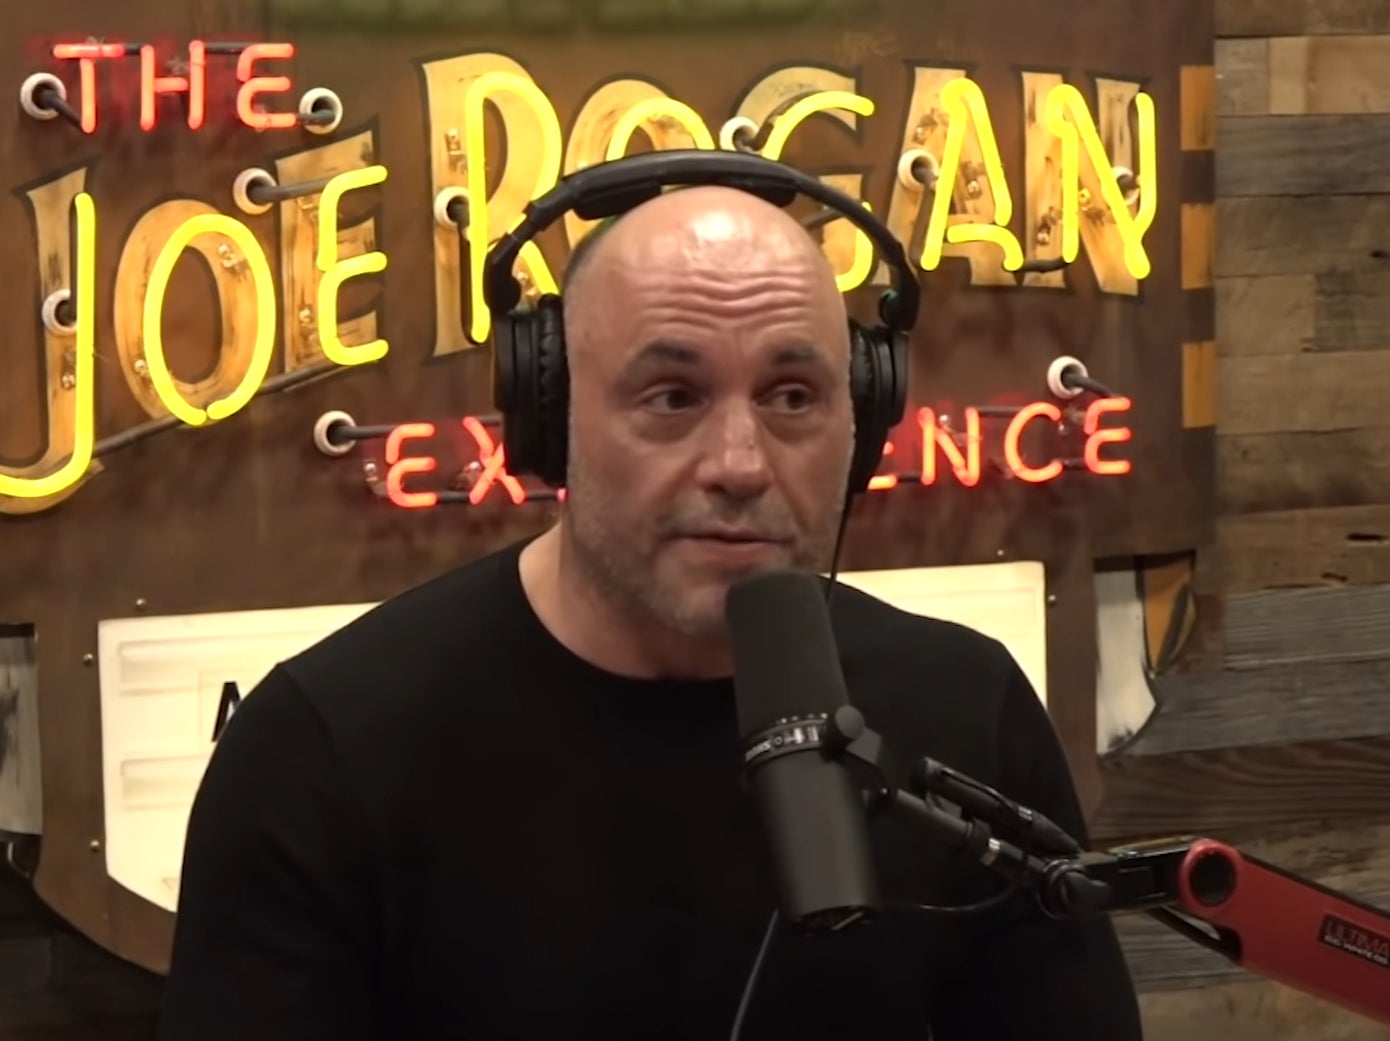 Joe Rogan is yet to speak out on the resurfaced clips